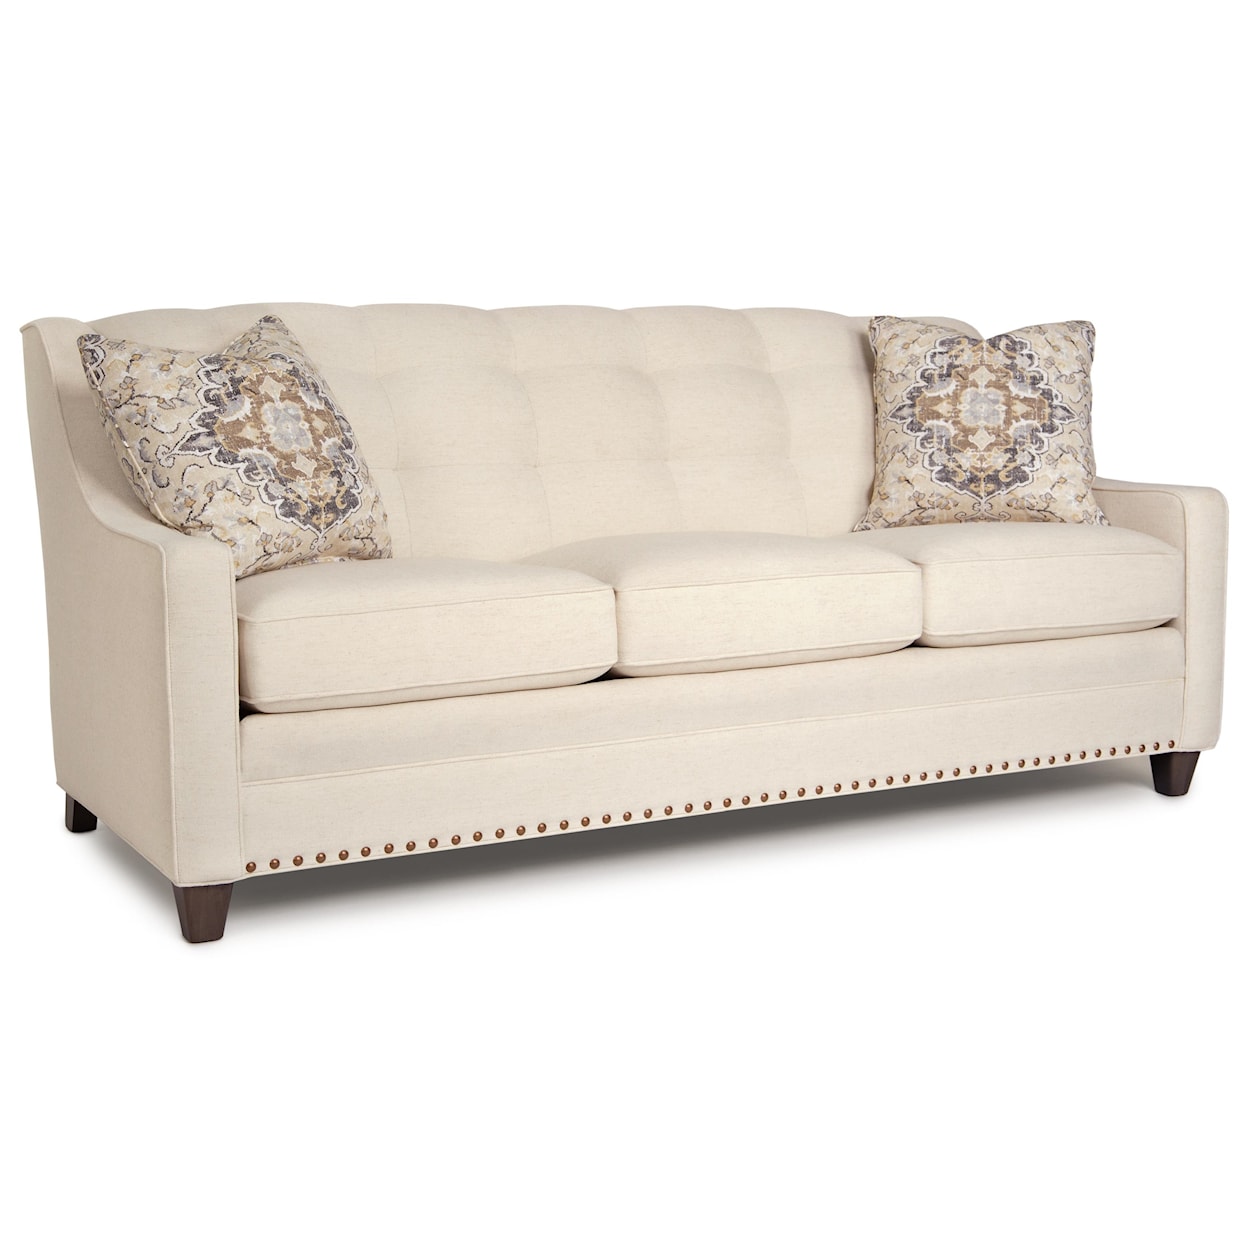 Smith Brothers 203 Transitional Sofa